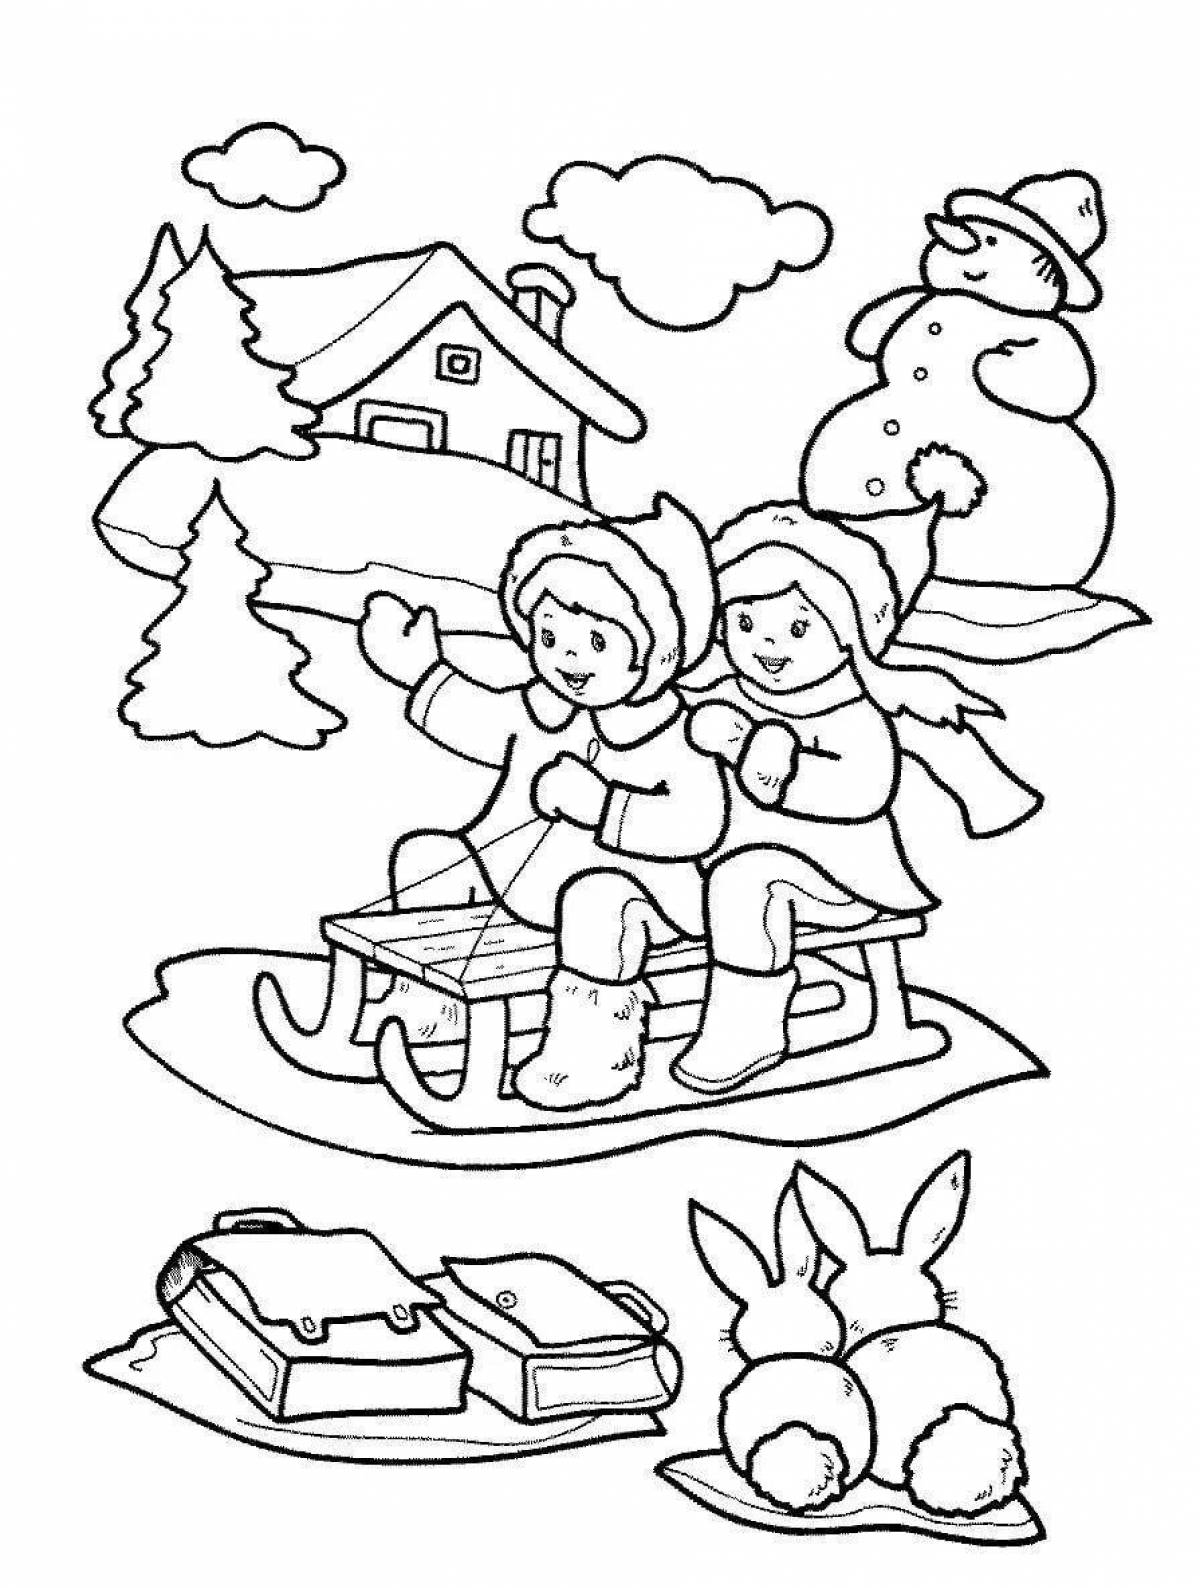 Children's shining winter day coloring book